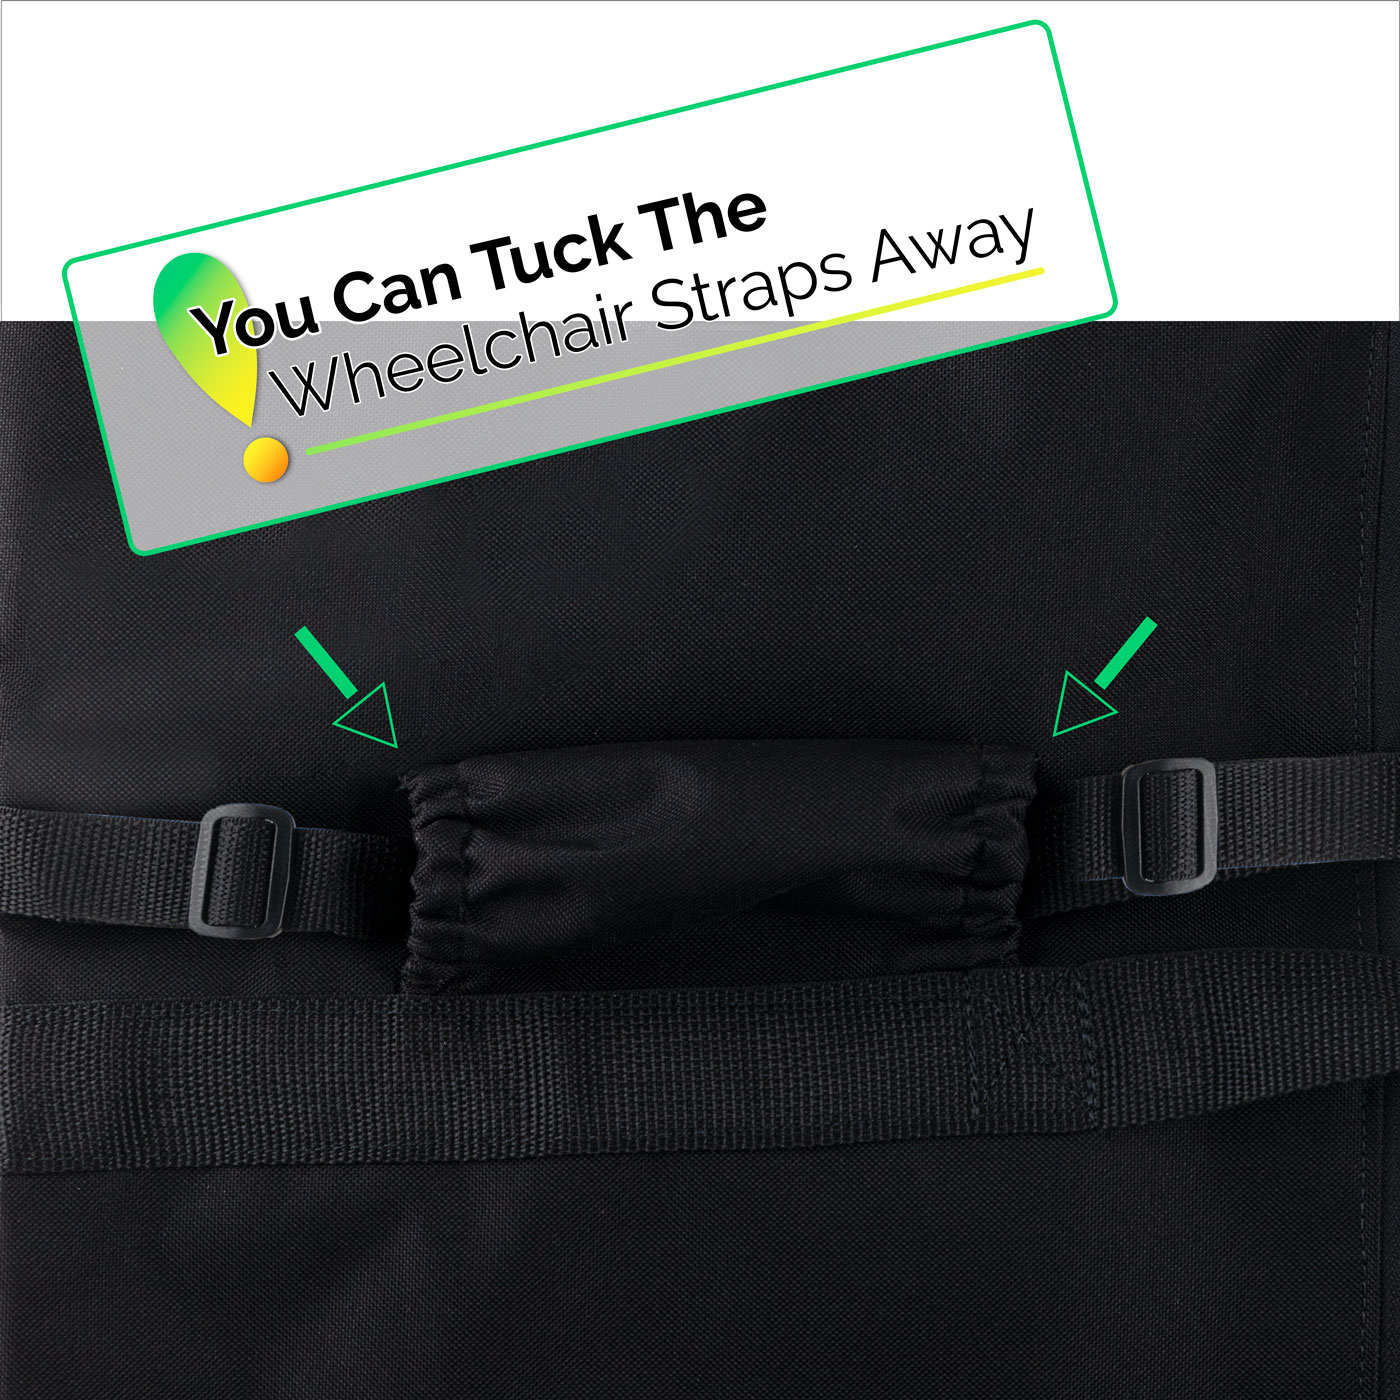 New Beasy carry case with straps insert image